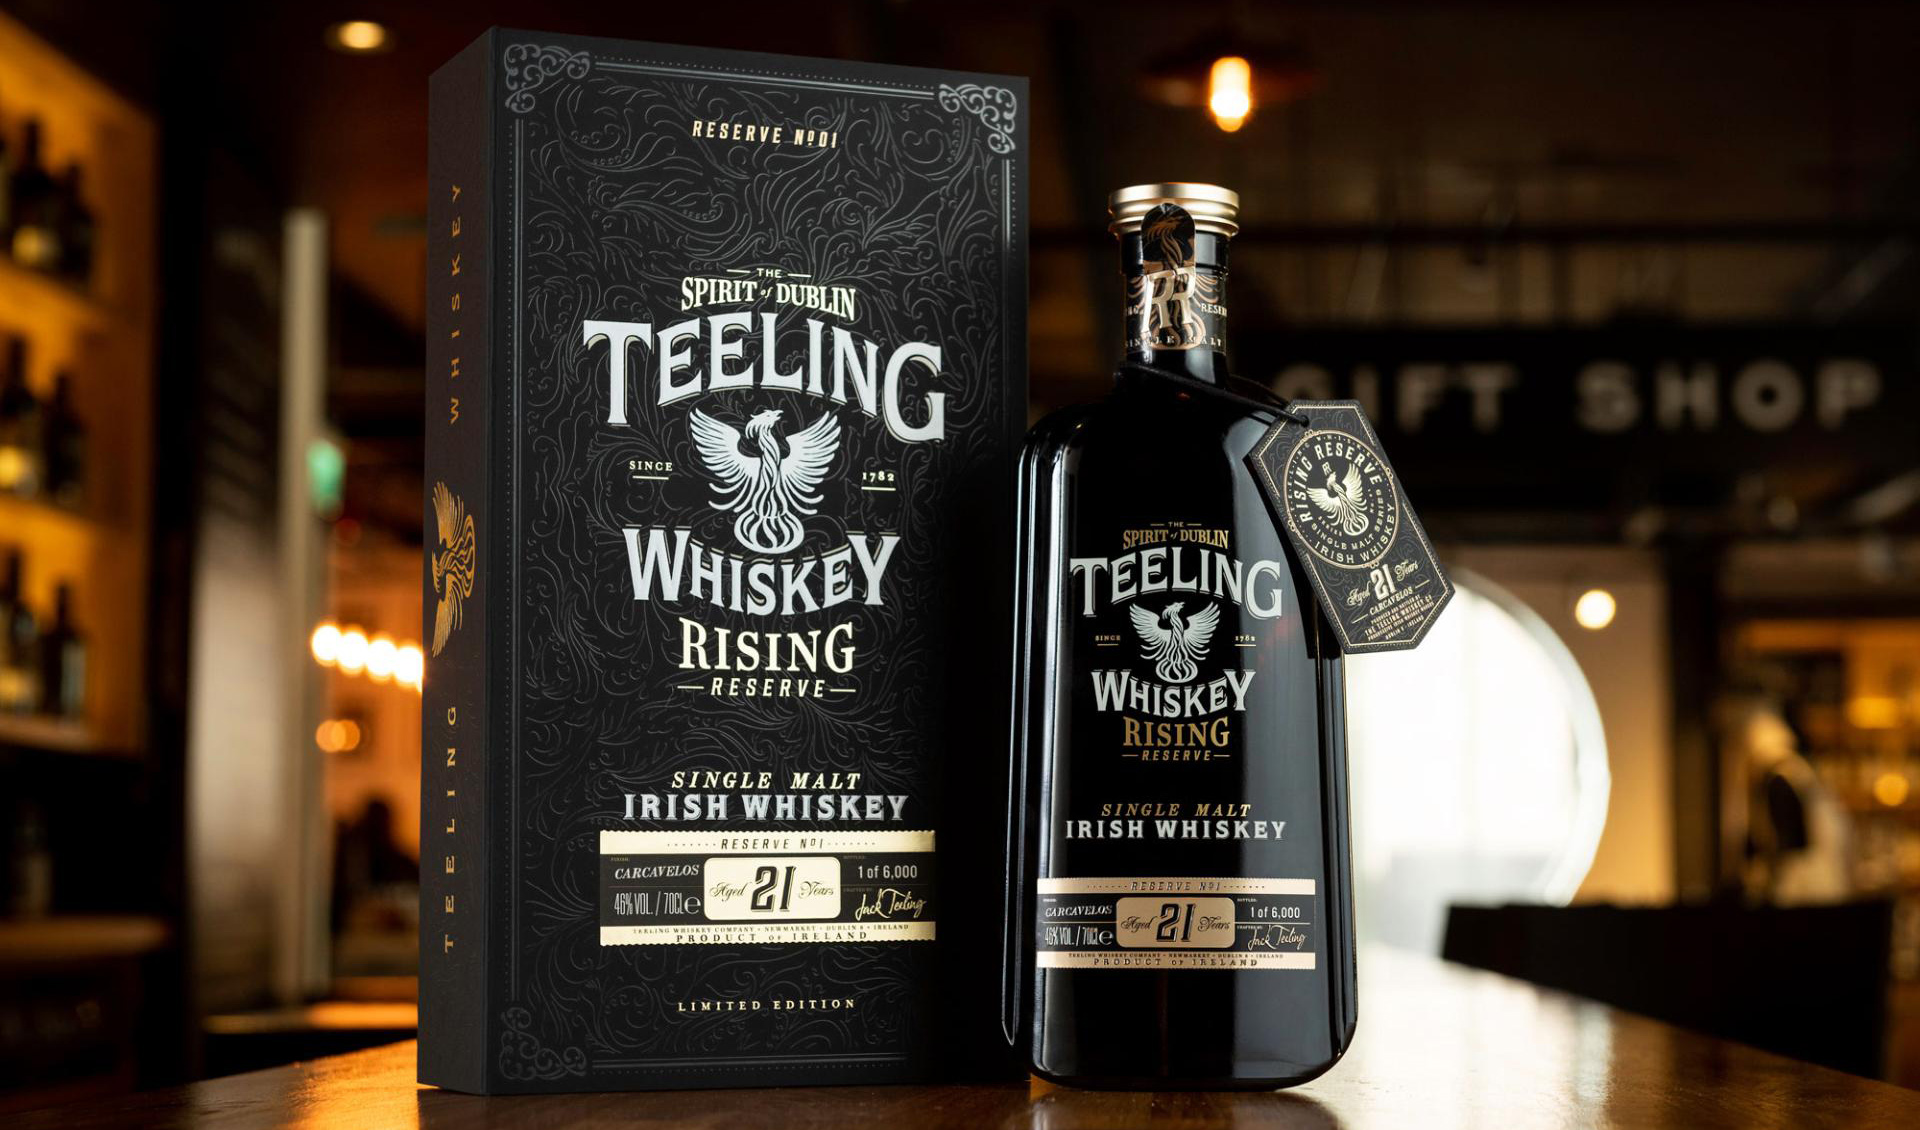 Teeling Is Releasing A 21-Year-Old Irish Single Malt That Aged In White Port Casks For 5 Years